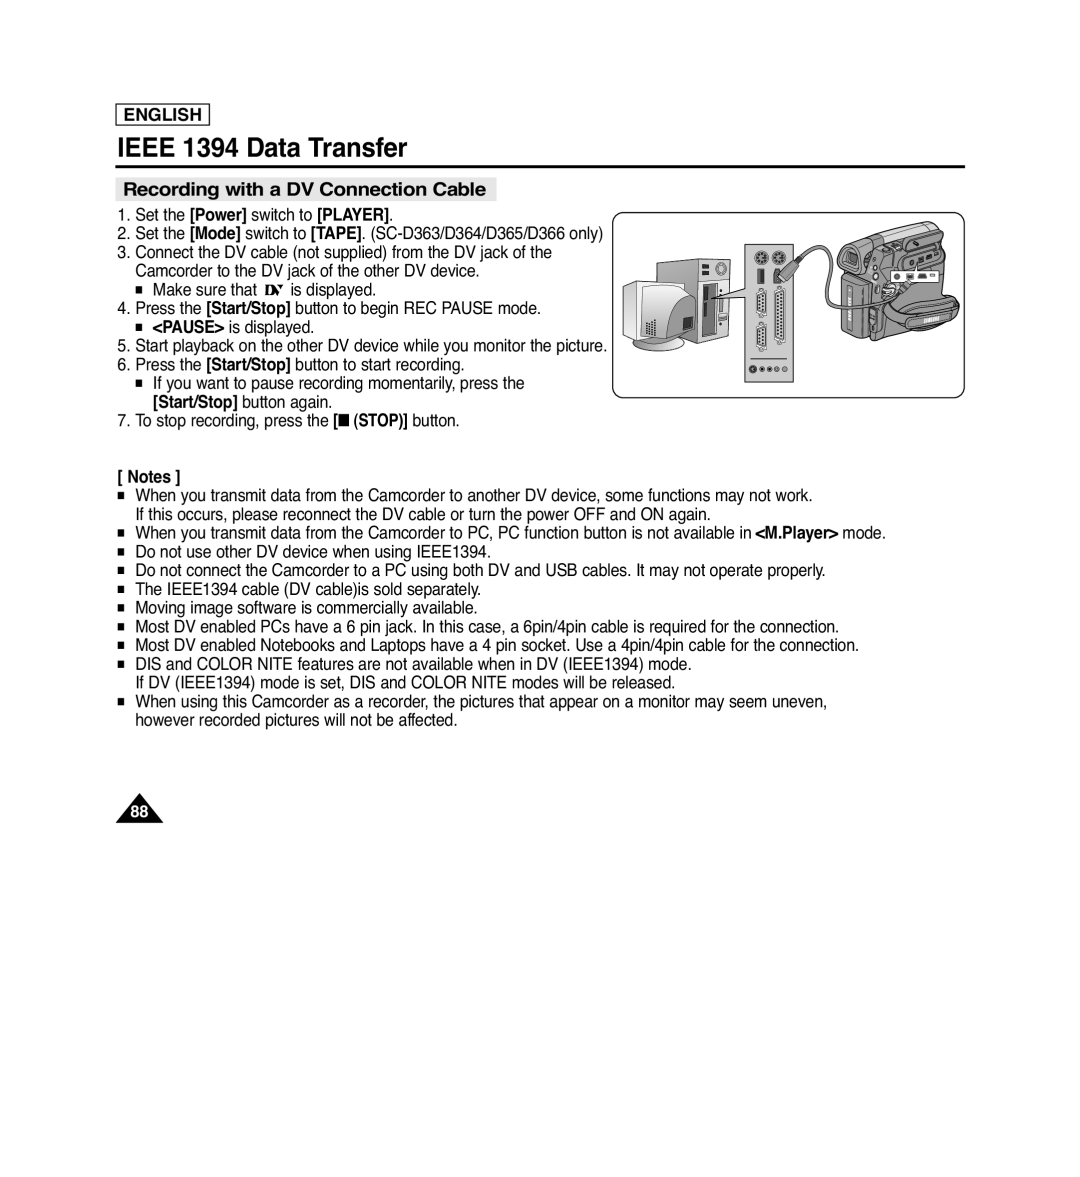 Samsung SC-D263, SC-D366, SC-D364, SC-D362 manual Recording with a DV Connection Cable, IEEE 1394 Data Transfer, English 